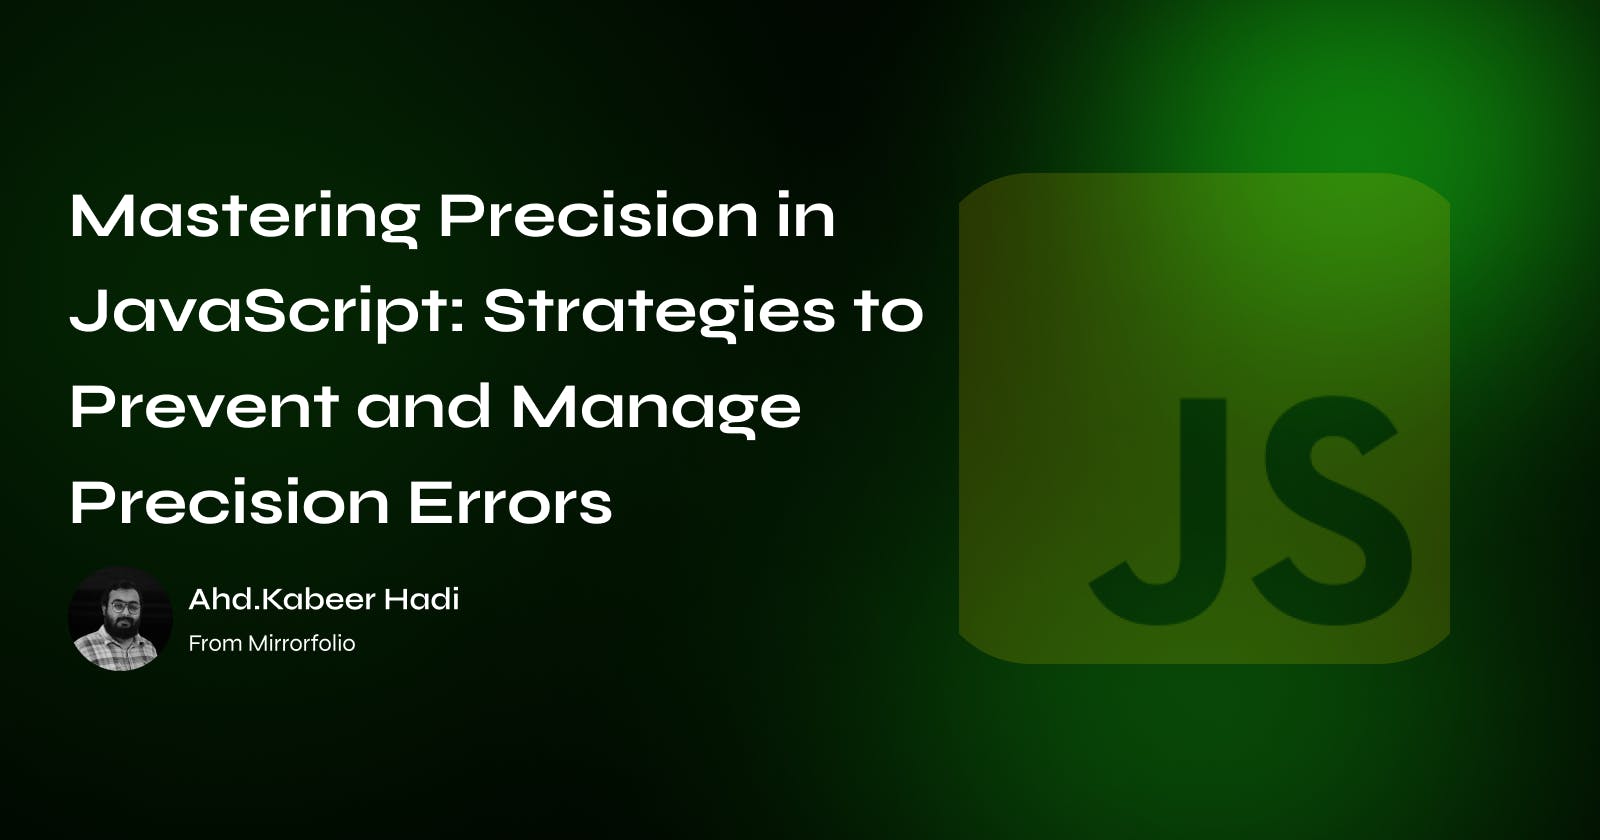 Mastering Precision in JavaScript: Strategies to Prevent and Manage Precision Errors